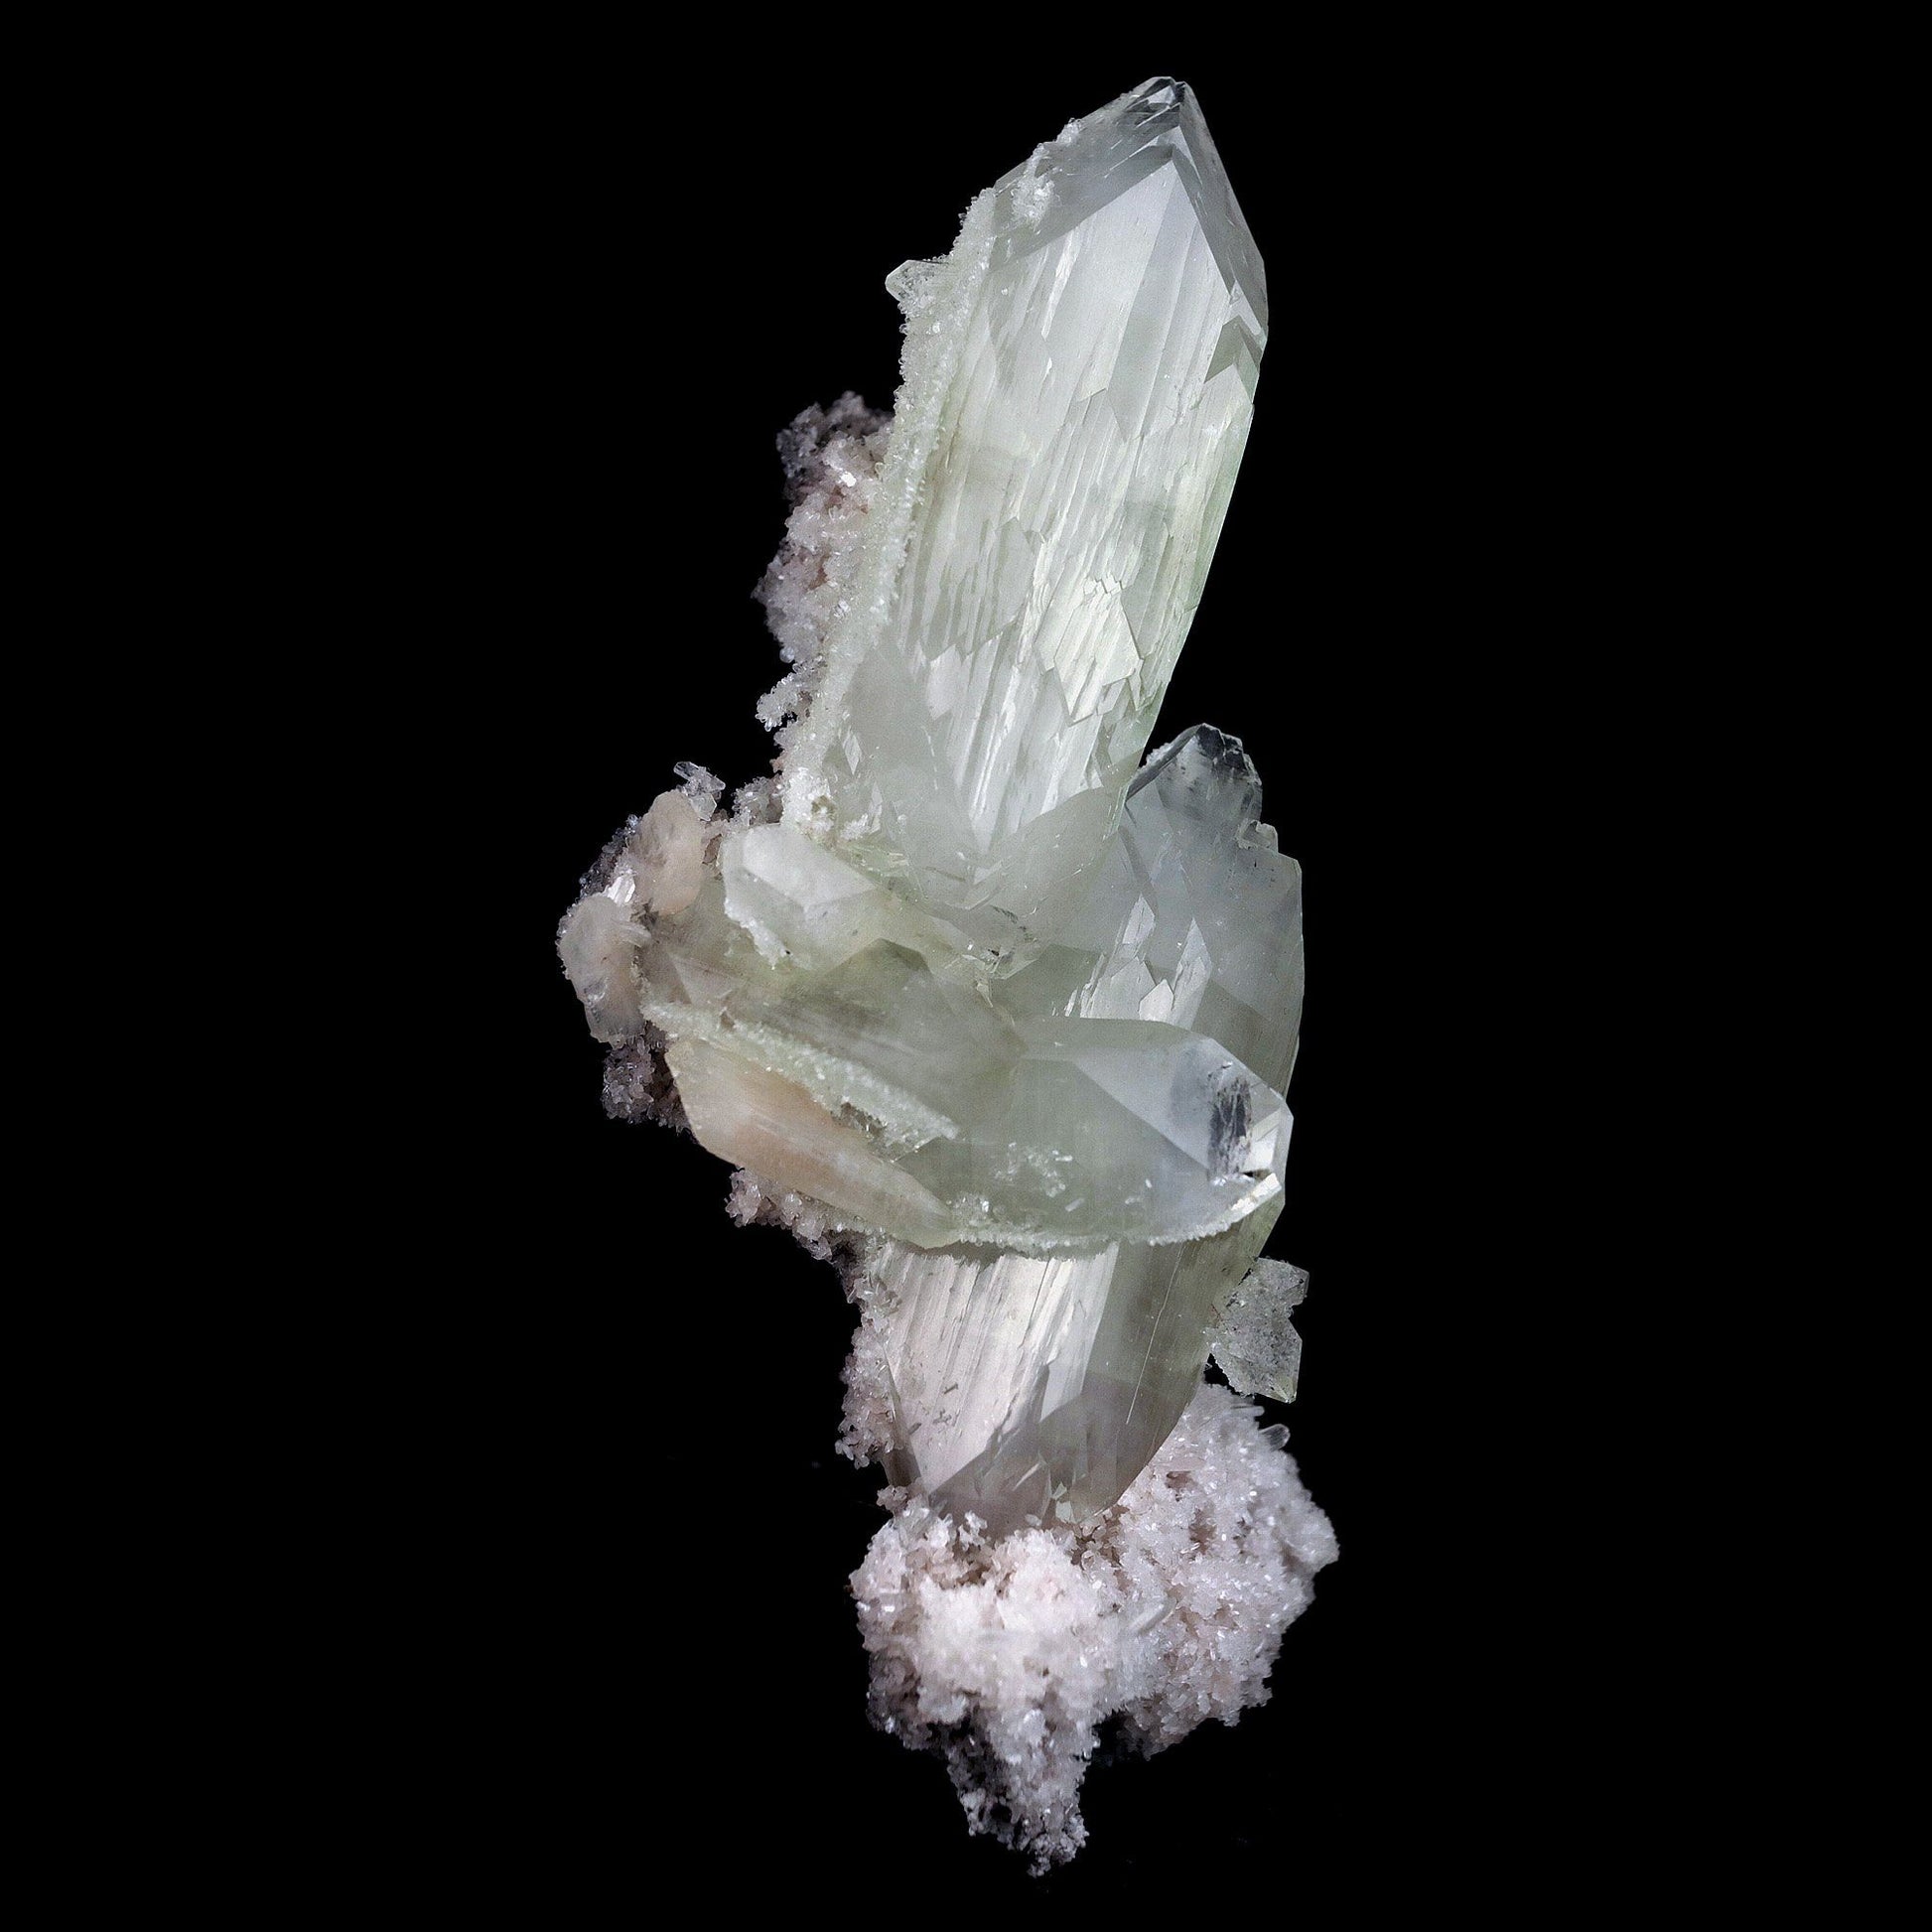 Doubly Terminated Fluro Apophyllite On Chalcedony Natural Mineral Spec…  https://www.superbminerals.us/products/doubly-terminated-fluro-apophyllite-on-chalcedony-natural-mineral-specimen-b-4429  Features: Fantastic two toned, very glassy tetragonal apophyllite crystals with remarkable water-clear, gem, highly modified pinacoidal terminations around translucent bodies form a beautiful architectural stalactite from Jalgaon. The crowning crystal has a length of 5.5 cm.The silica-rich precipitated fluids 